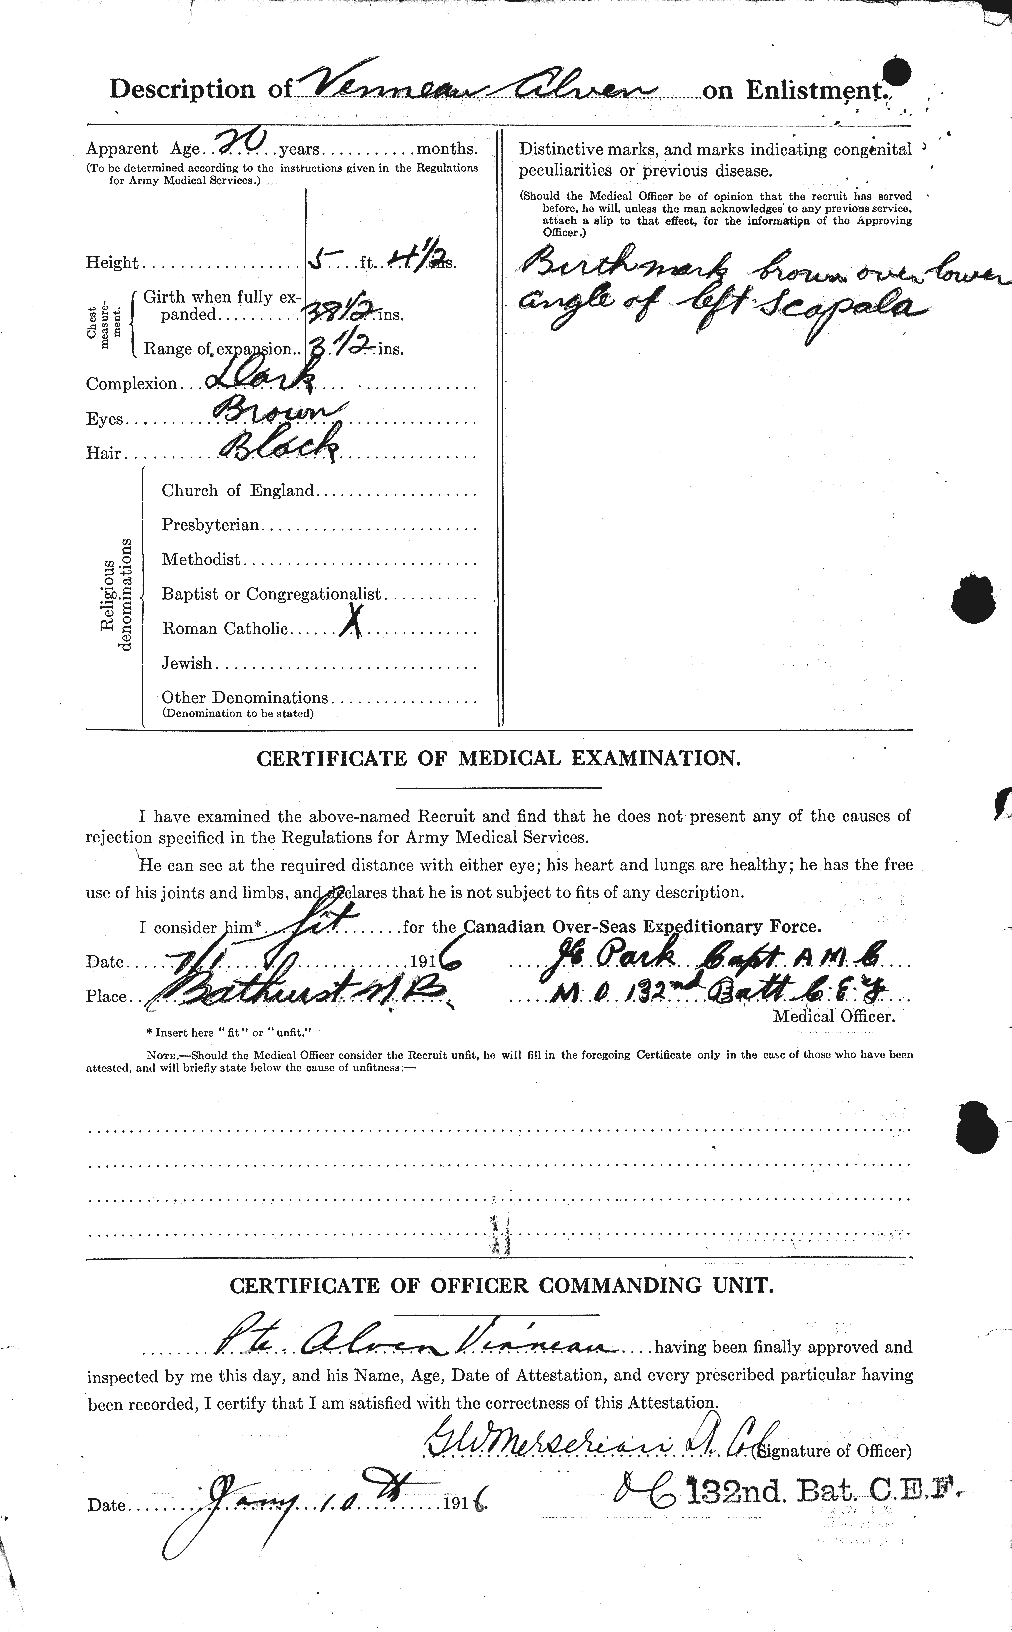 Personnel Records of the First World War - CEF 648653b